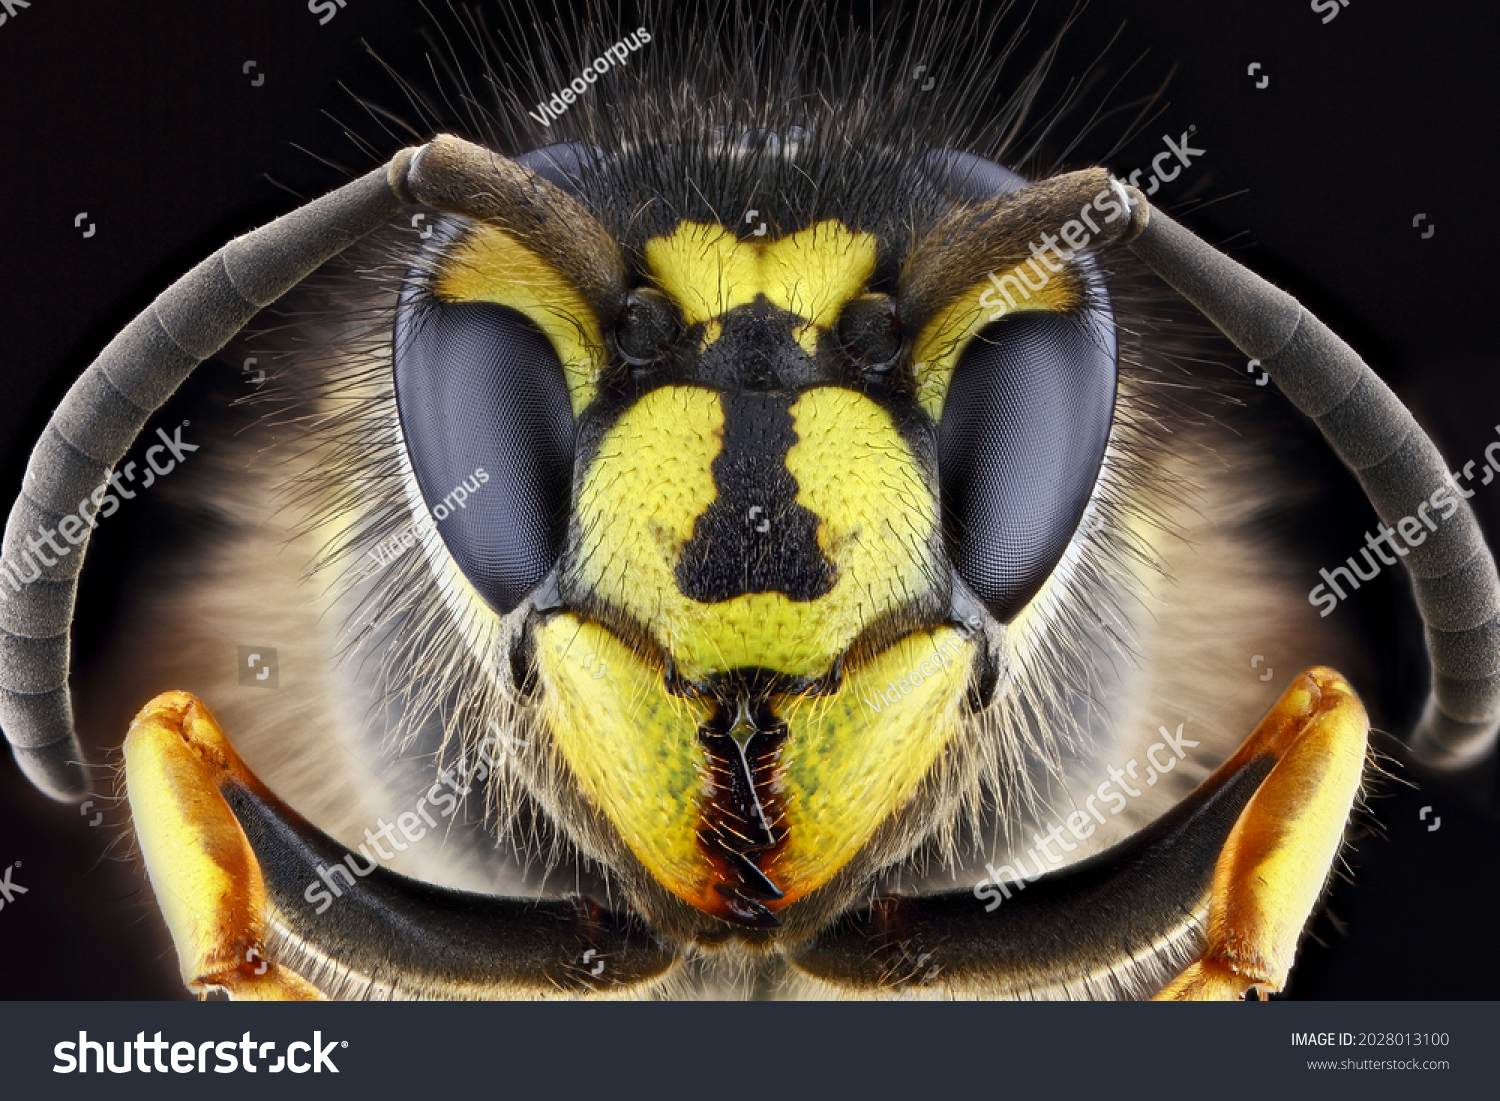 Super macro portrait of a wasp on a black background. Full-face macro photography. Large depth of field and a lot of details of the insect. #2028013100